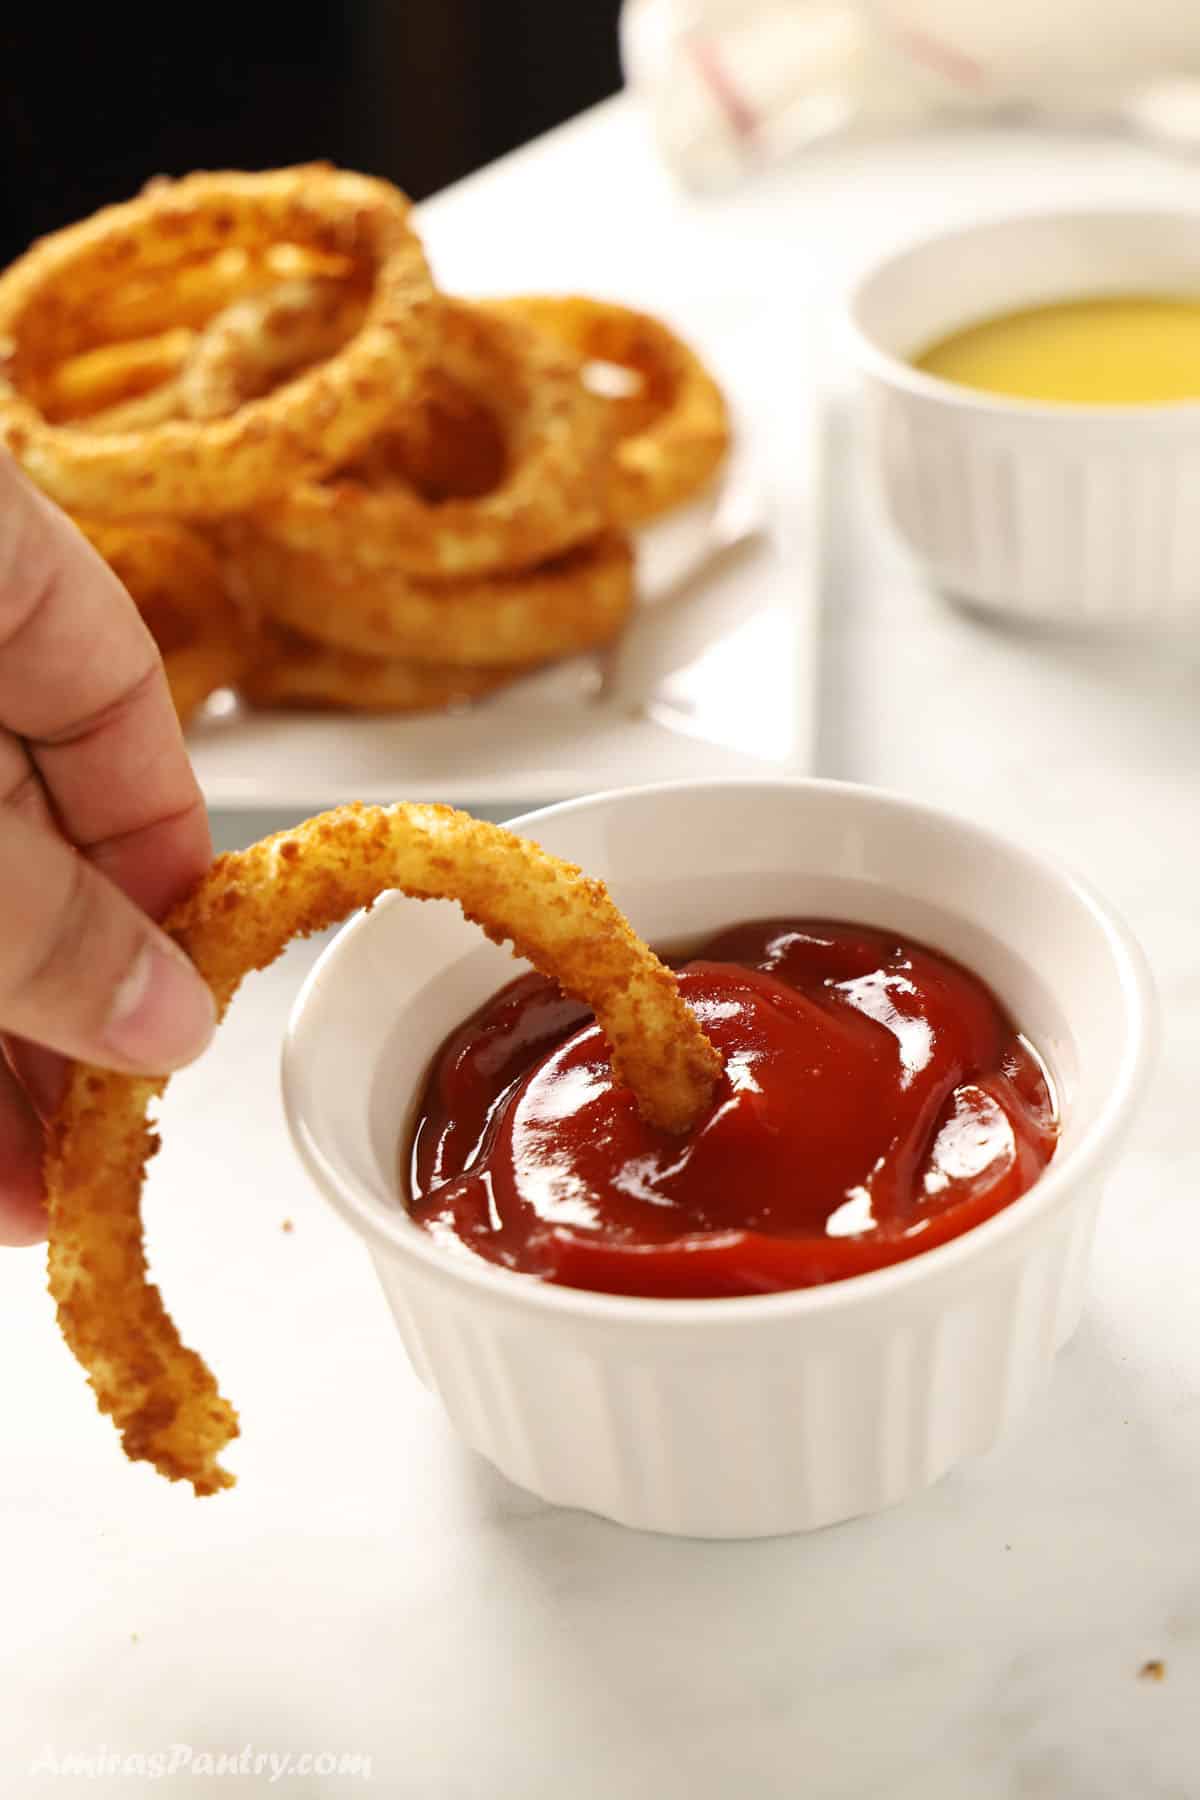 A hand dipping one onion ring in sauce.